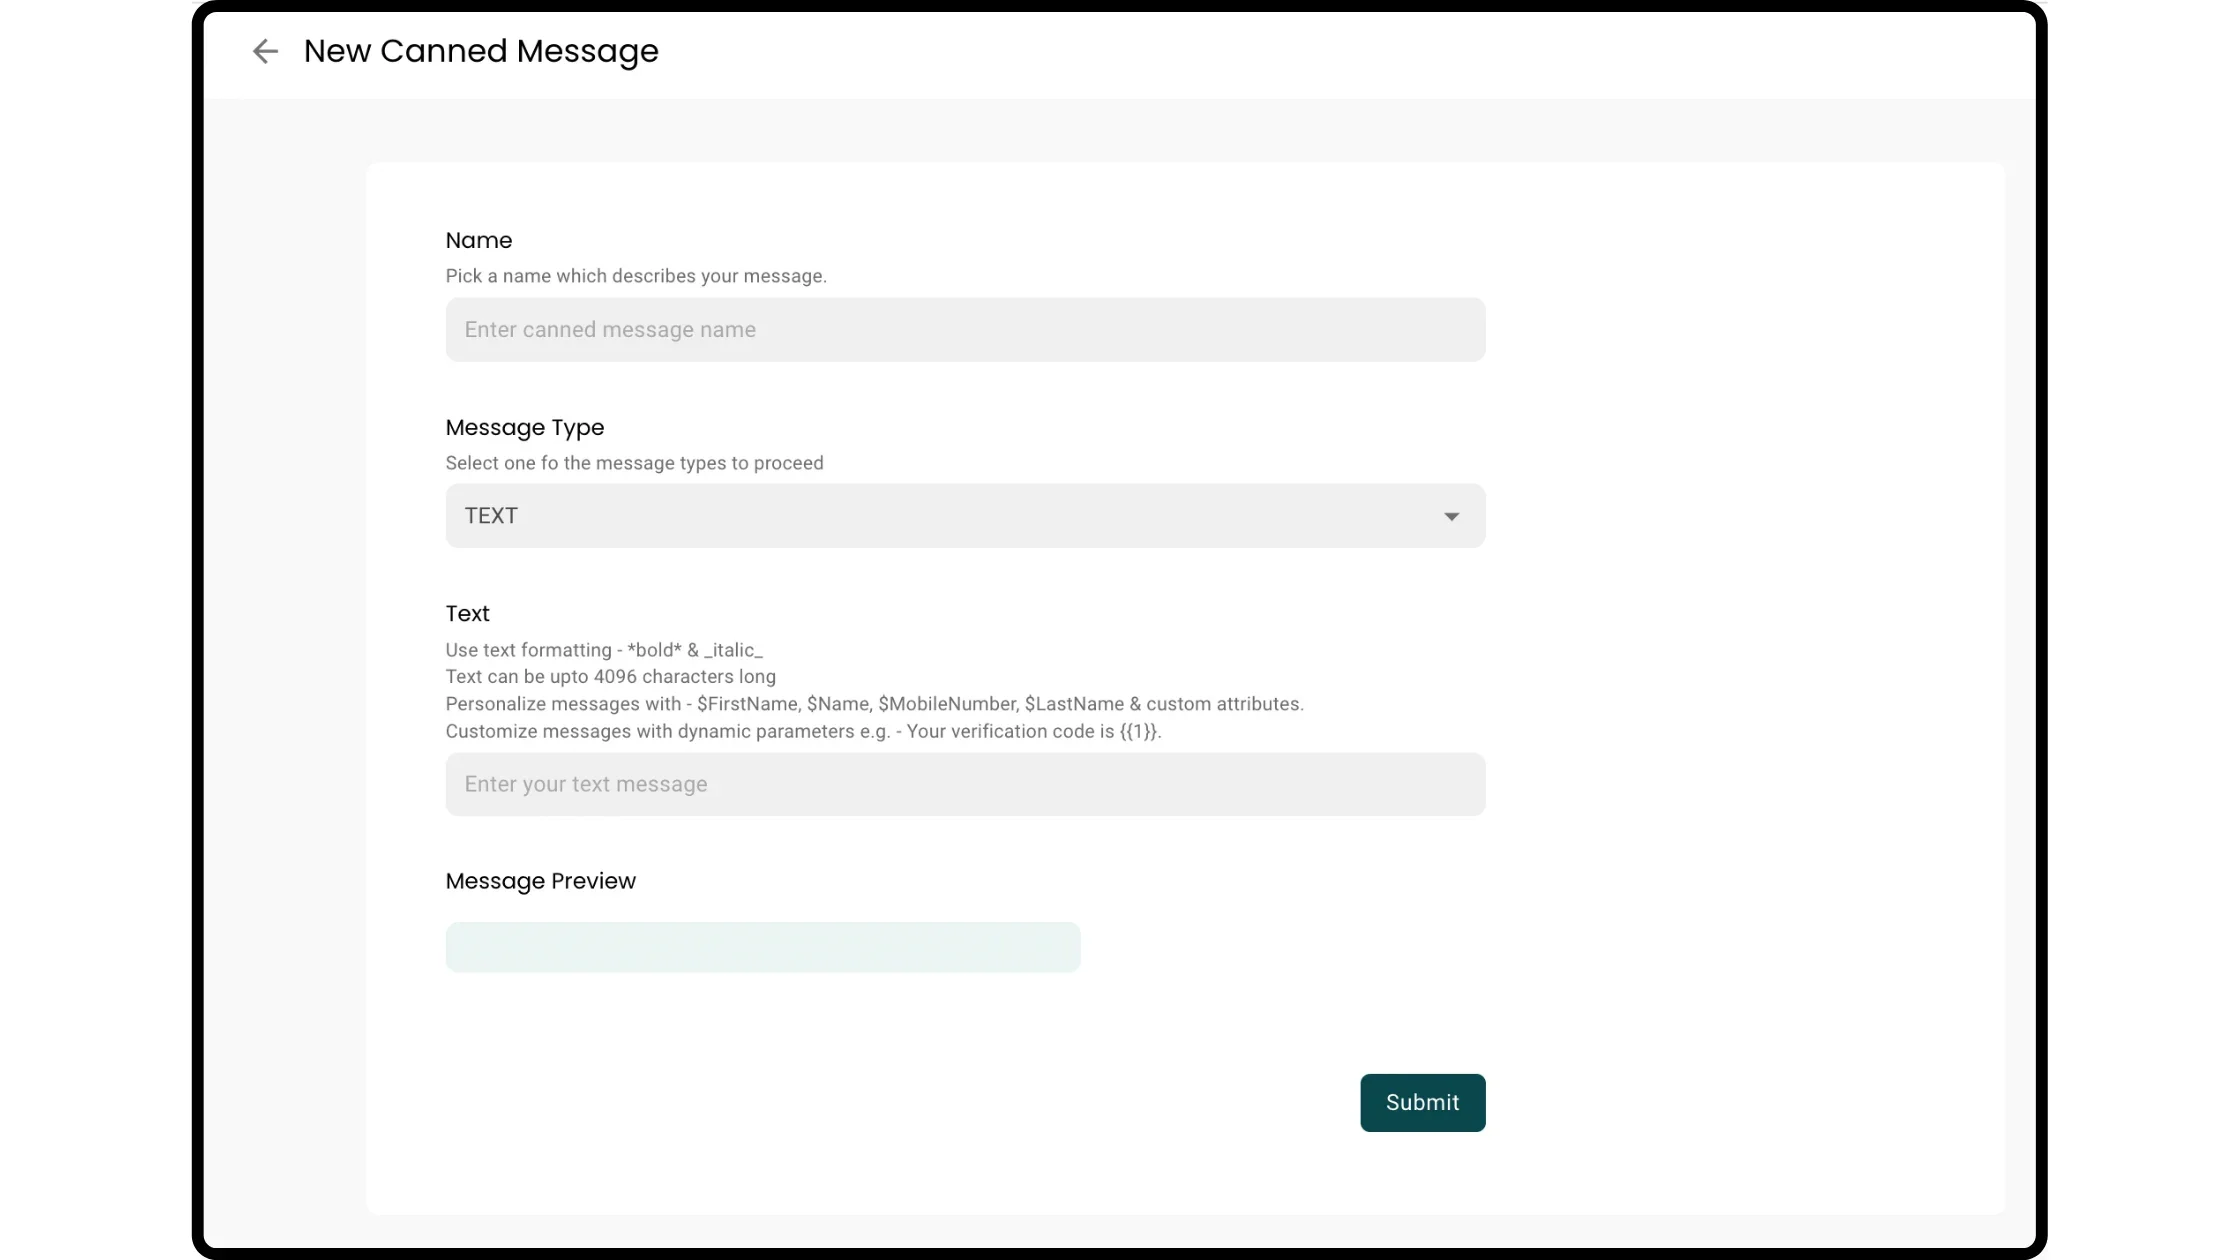 Create a canned message